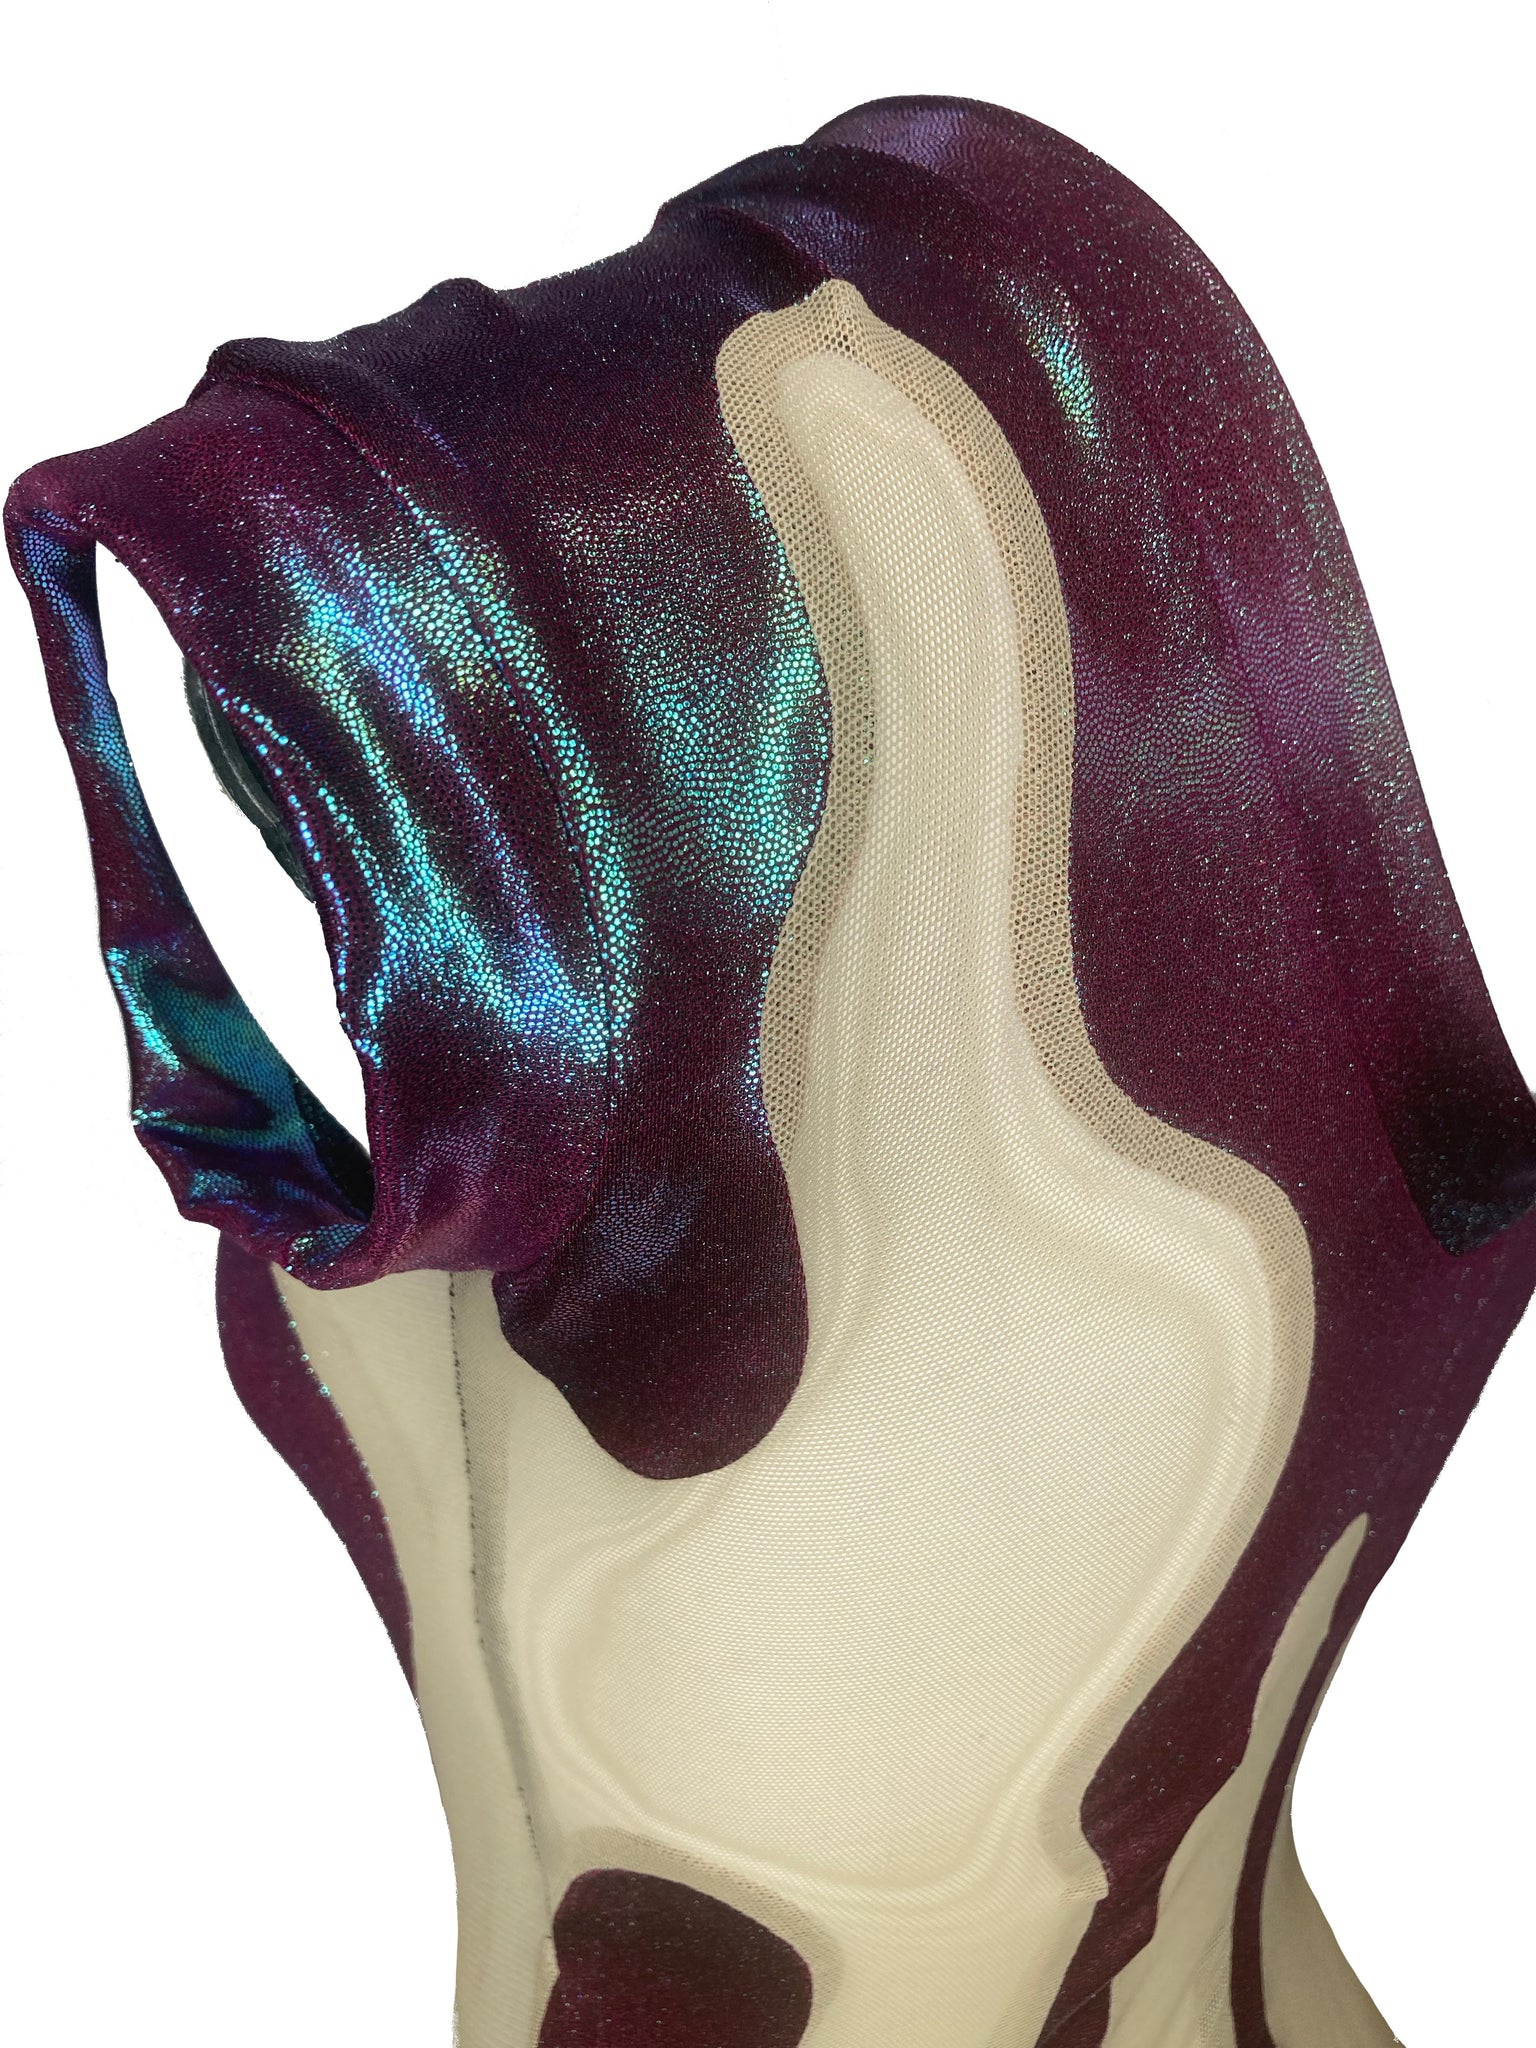 LIMITED EDITION Oil Slick GUM Body